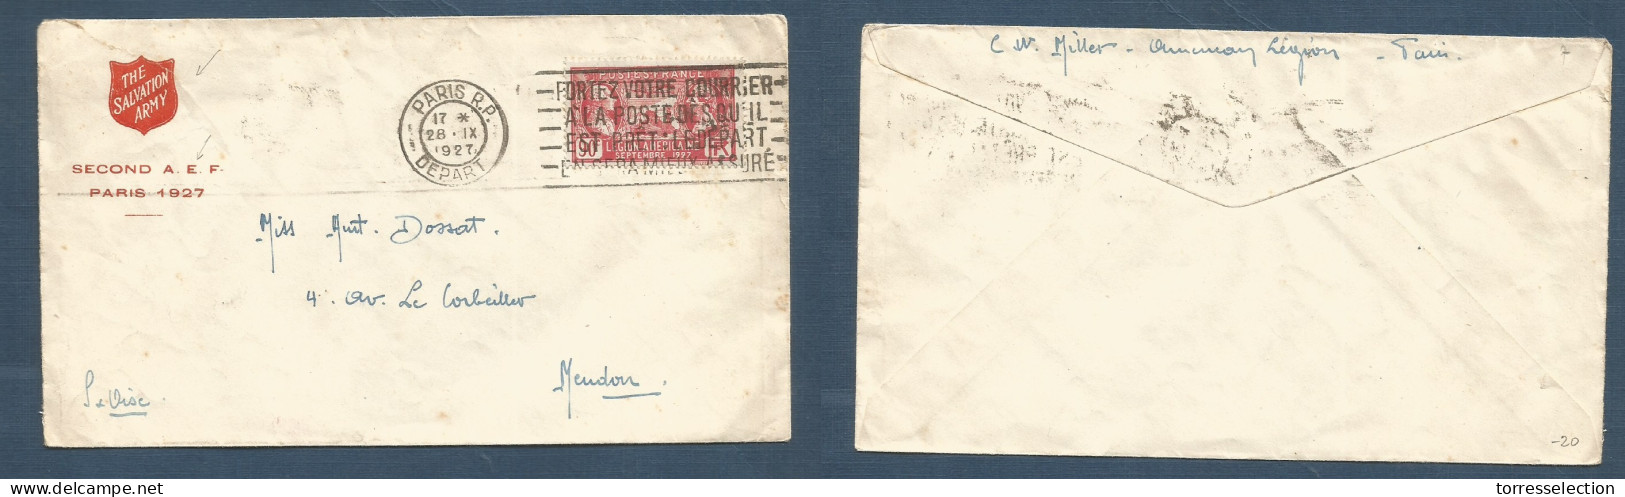 MILITARY MAIL. 1927 (28 Sept) USA, American Forces- Second AEF. Salvation Army Fkd Envelope. America Legion. Local Fkd U - Militärpost (MP)